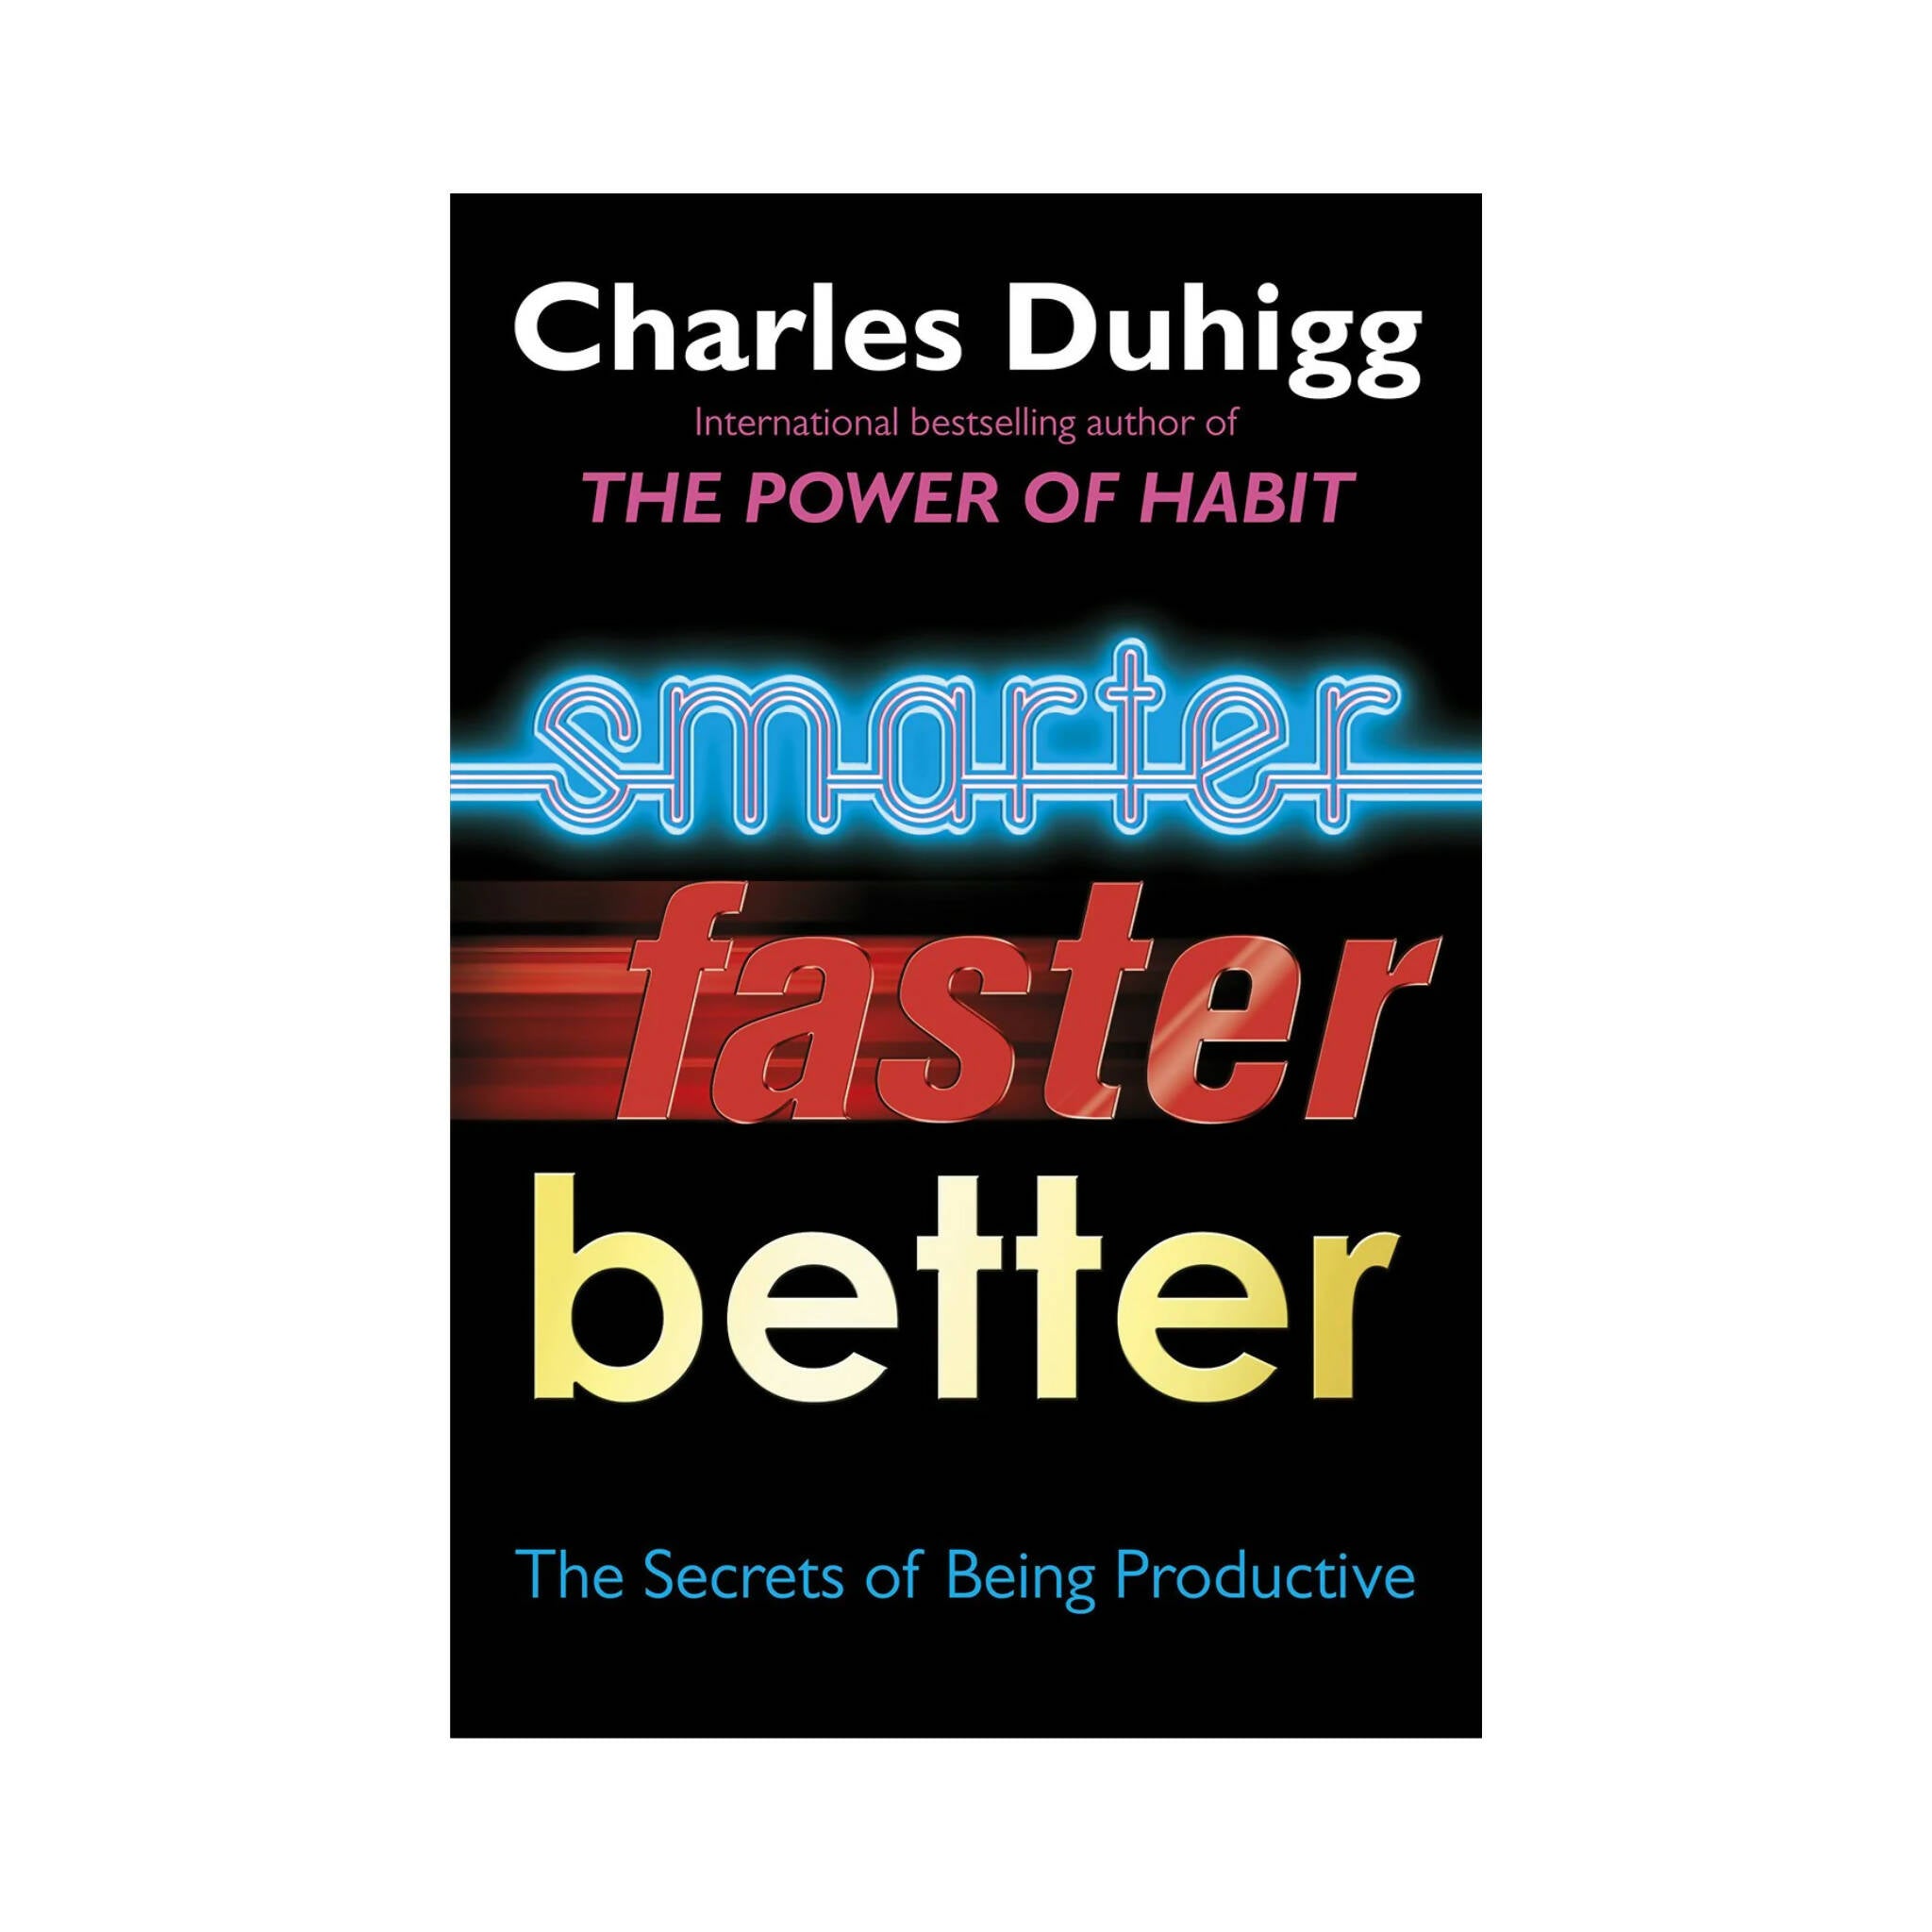 Book, Smarter Faster Better, The Secrets of Being Productive